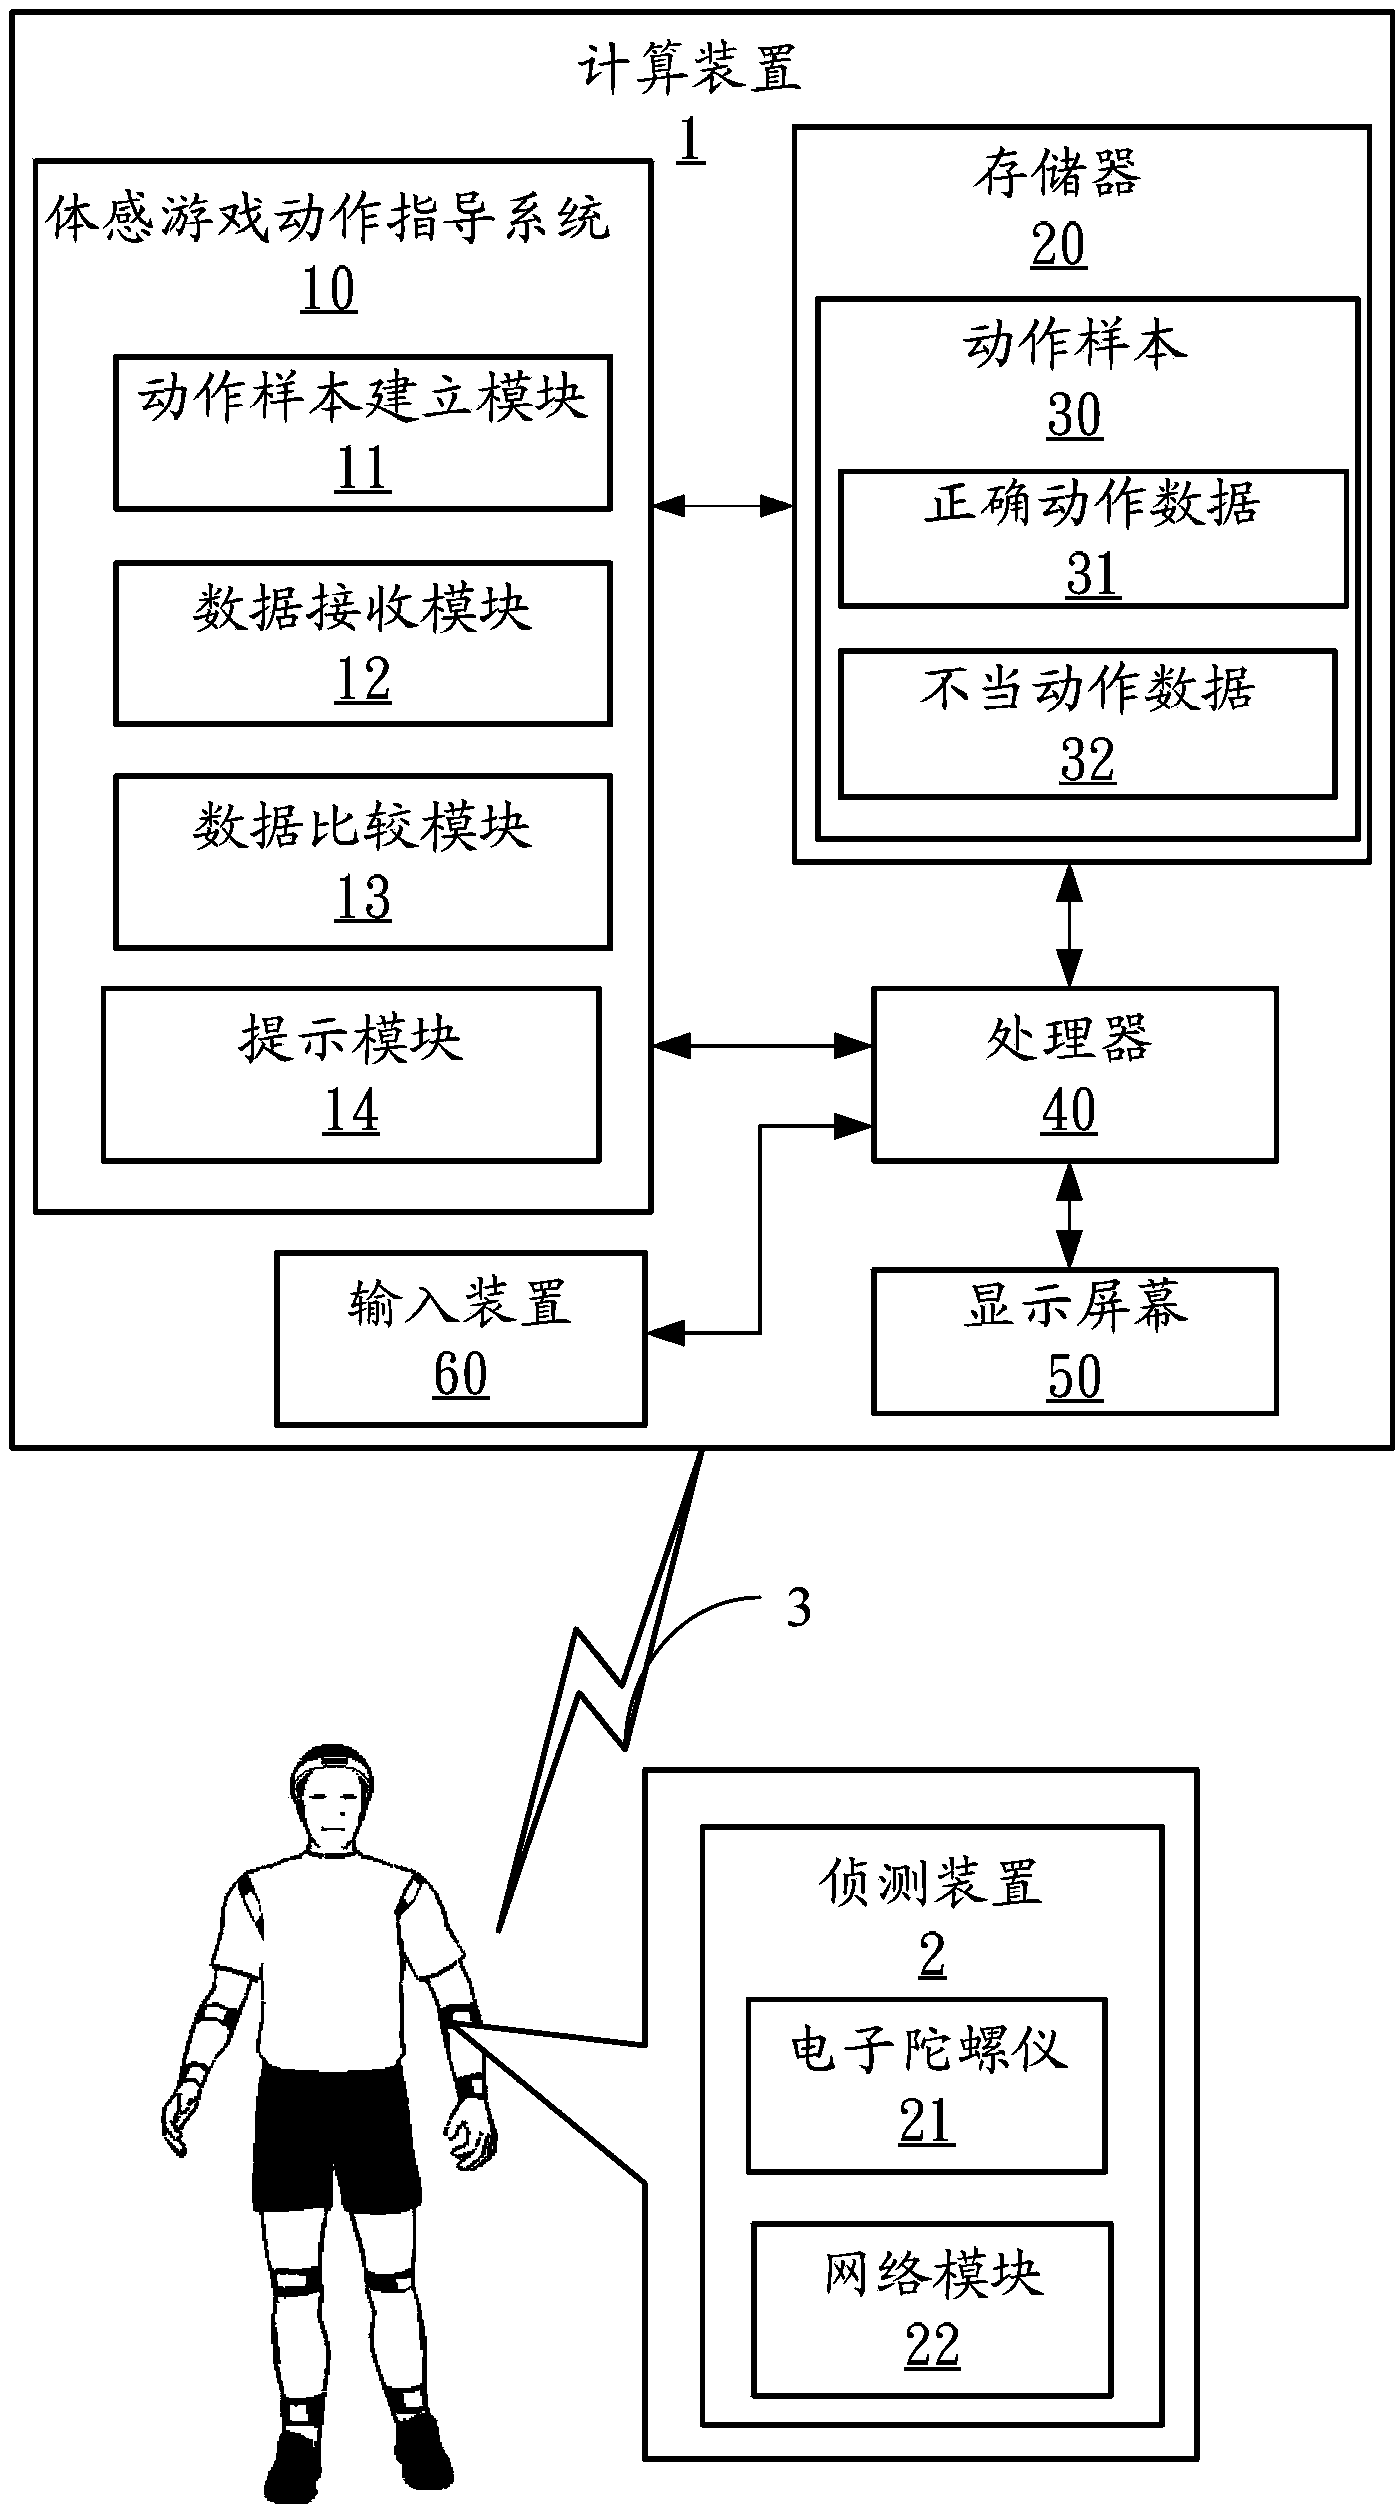 Method and system for motion guidance of motion sensing game